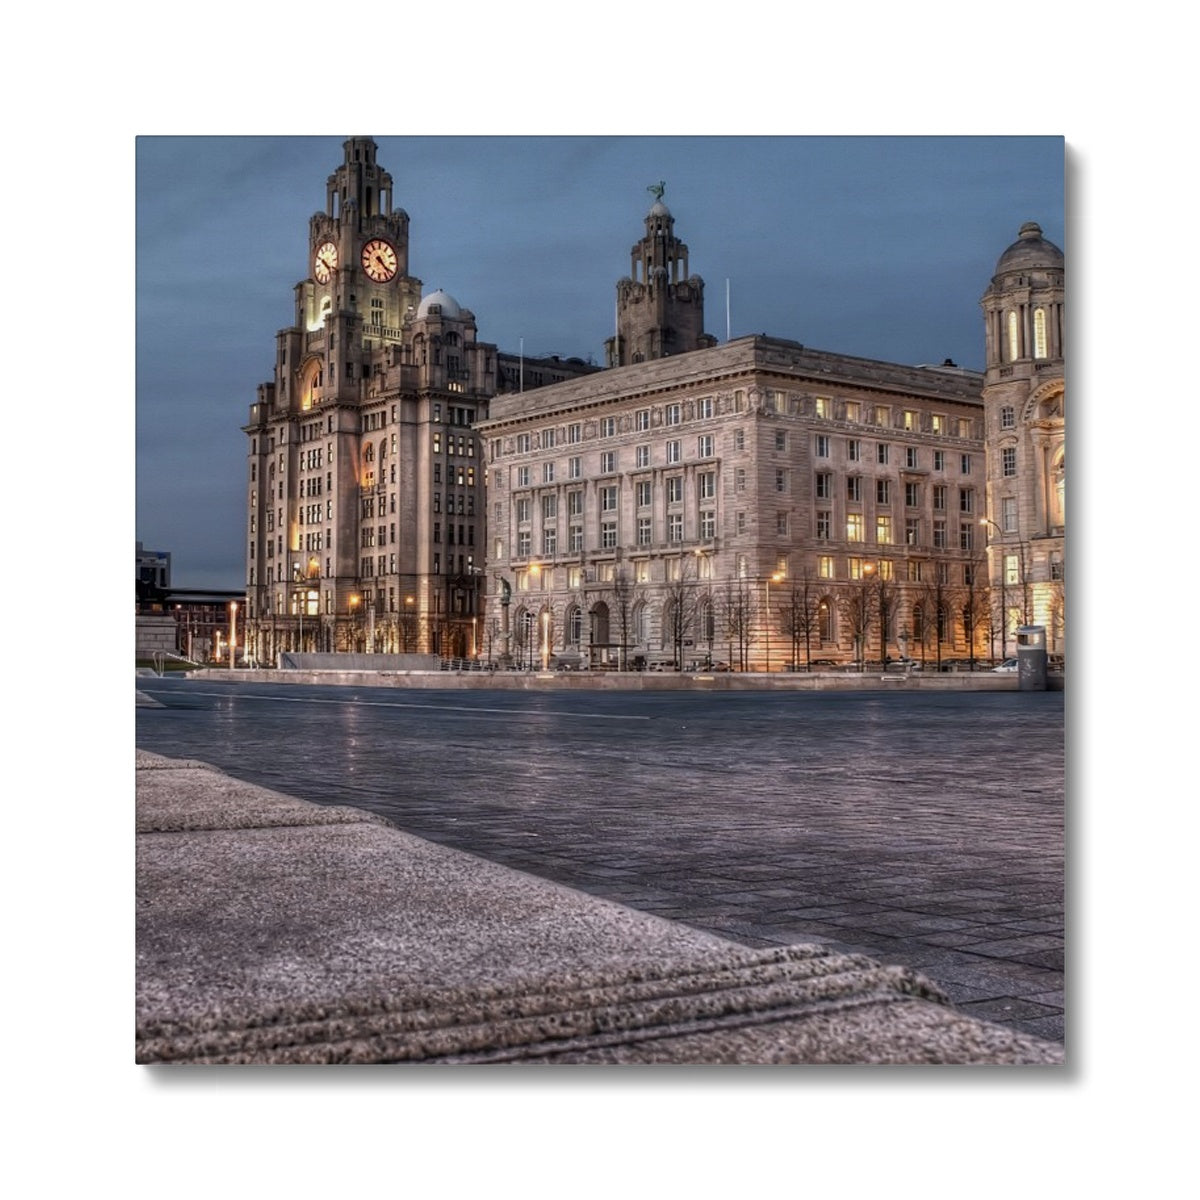 The Liver Buildings: A Liverpool Icon at Twilight Canvas